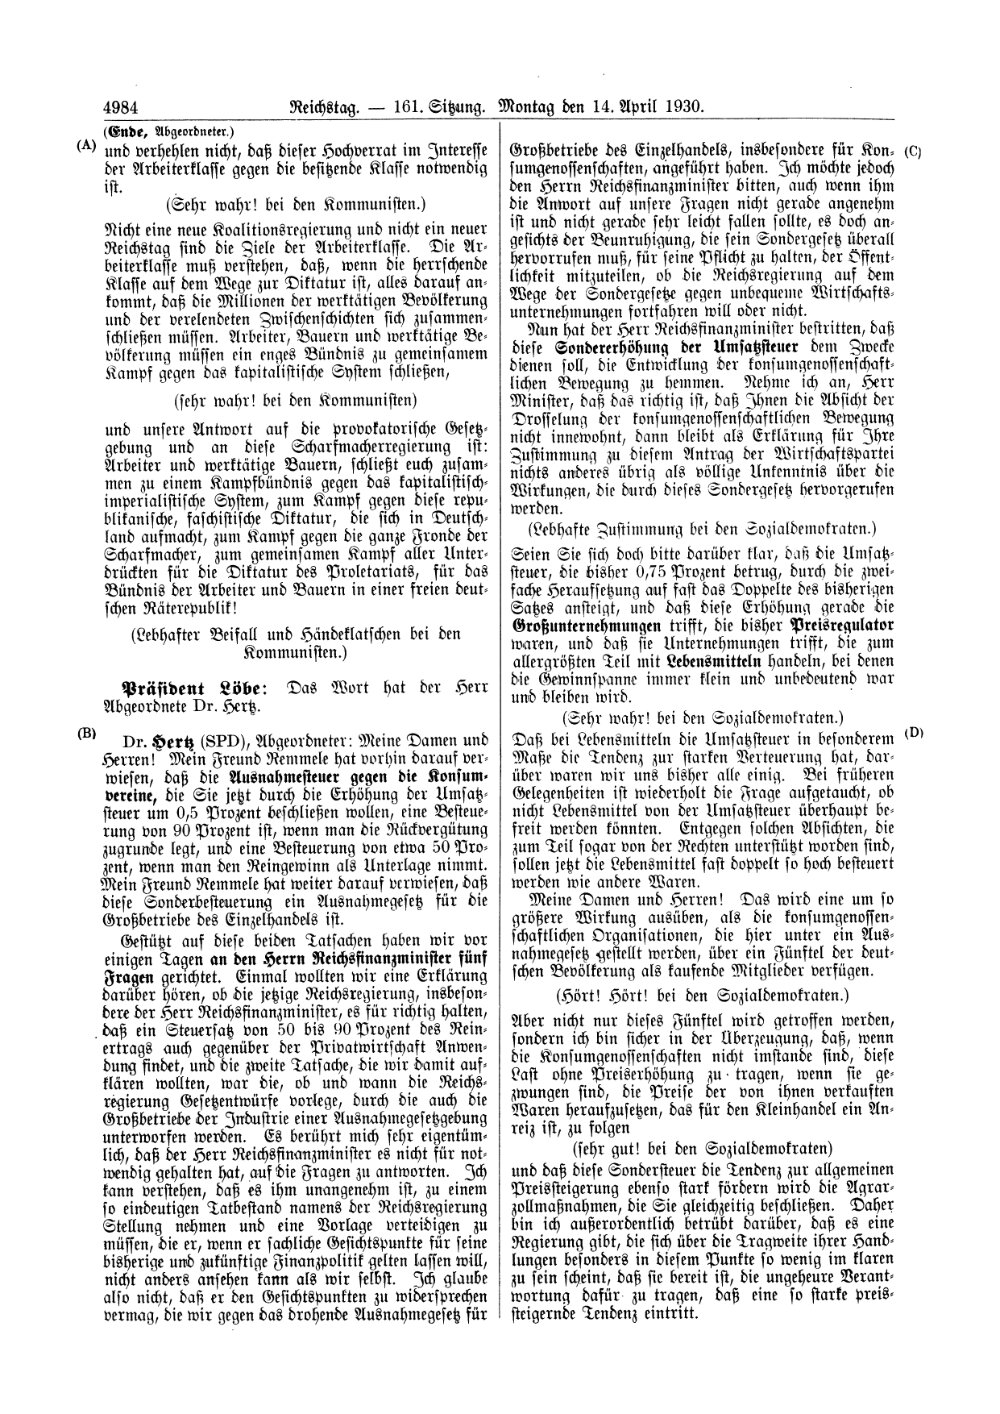 Scan of page 4984